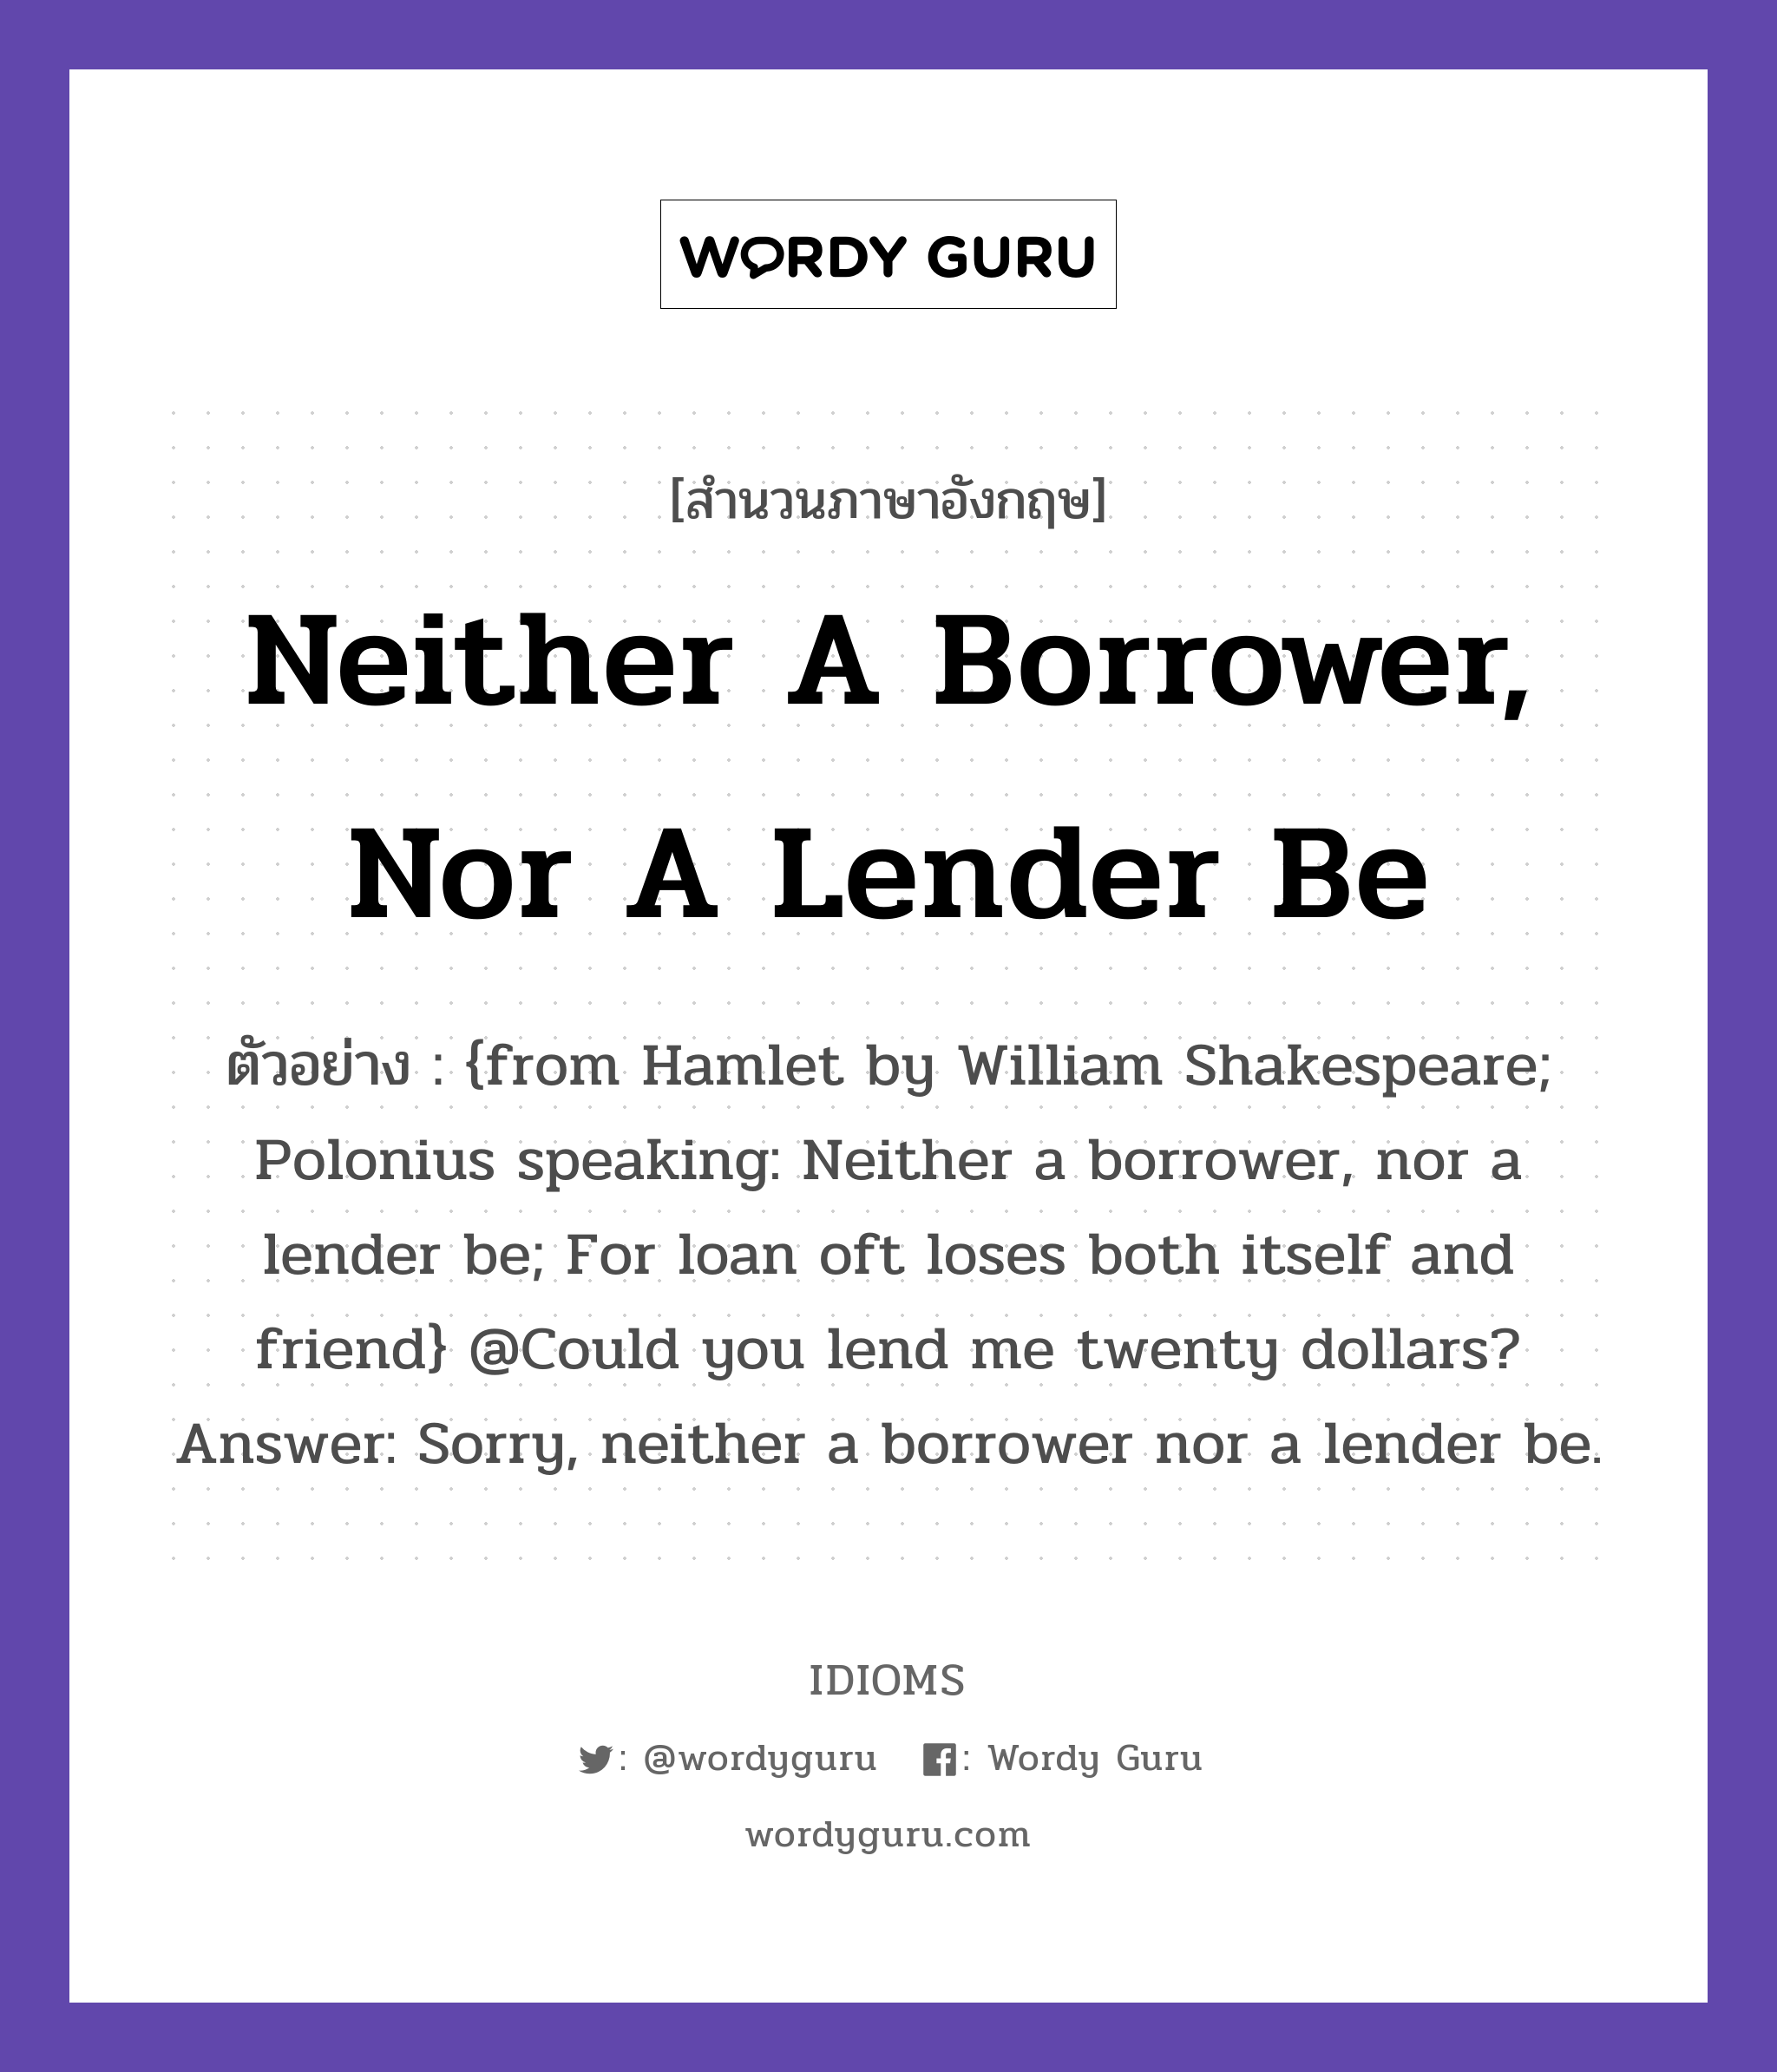 Neither A Borrower, Nor A Lender Be แปลว่า?, สำนวนภาษาอังกฤษ Neither A Borrower, Nor A Lender Be ตัวอย่าง {from Hamlet by William Shakespeare; Polonius speaking: Neither a borrower, nor a lender be; For loan oft loses both itself and friend} @Could you lend me twenty dollars? Answer: Sorry, neither a borrower nor a lender be.